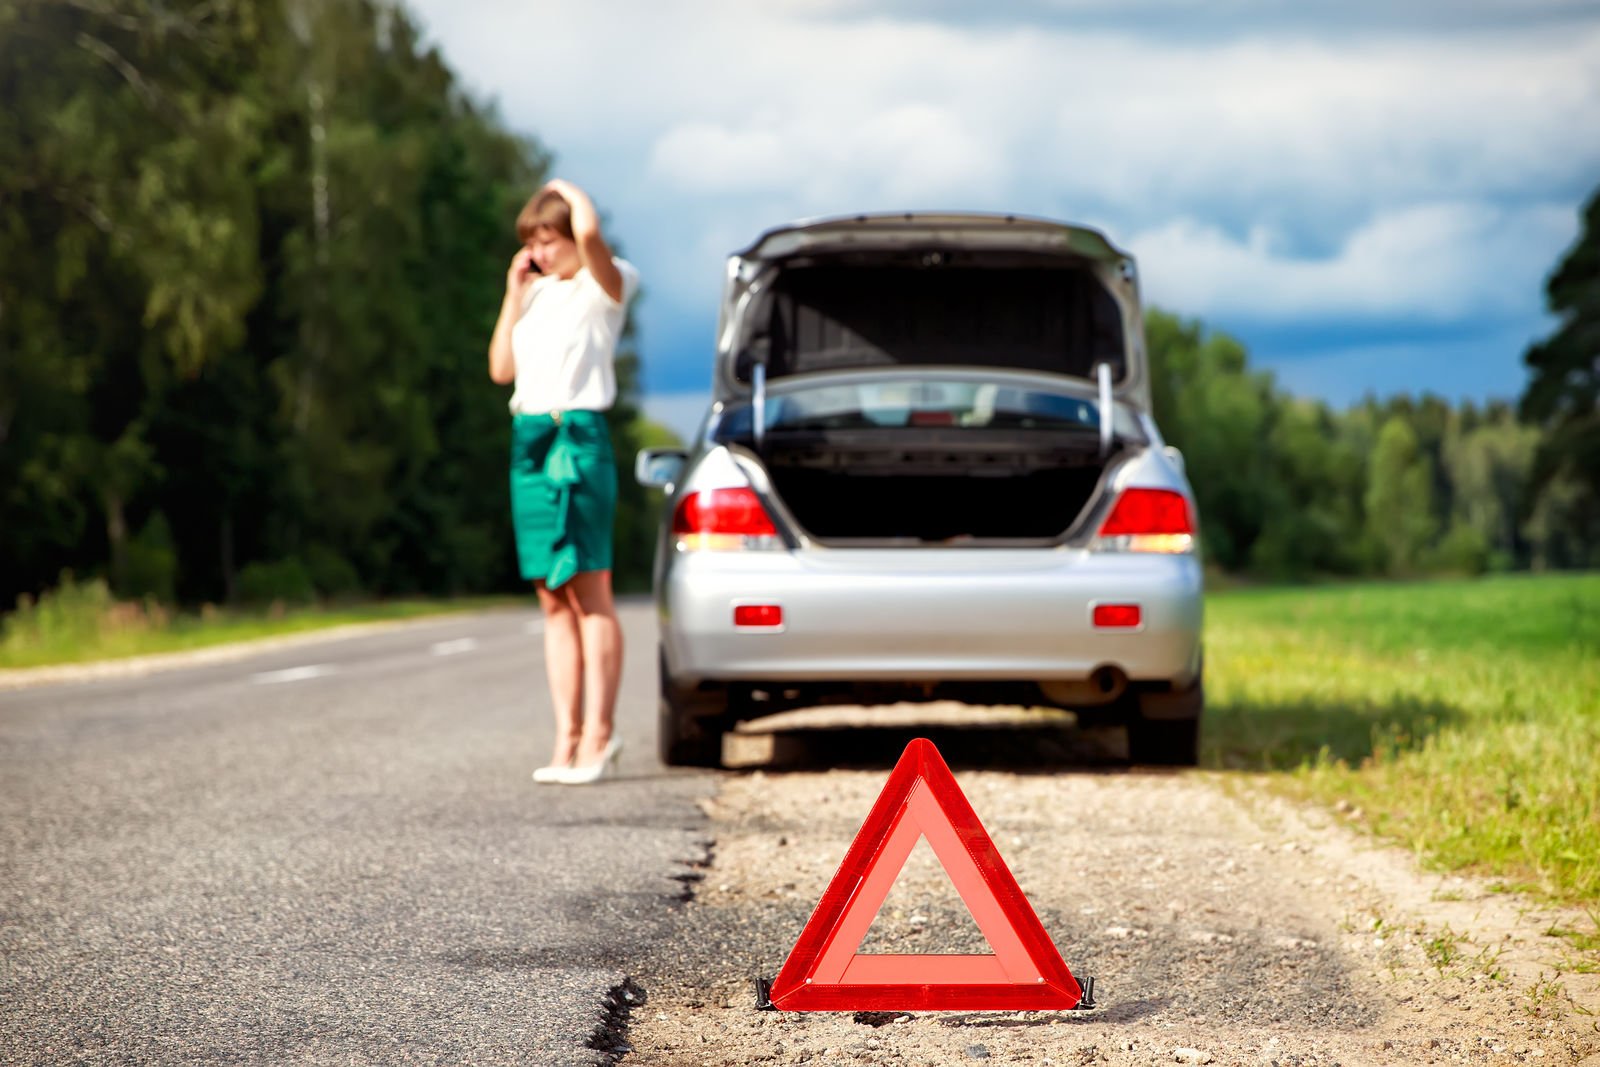 Can you tow a car without insurance?